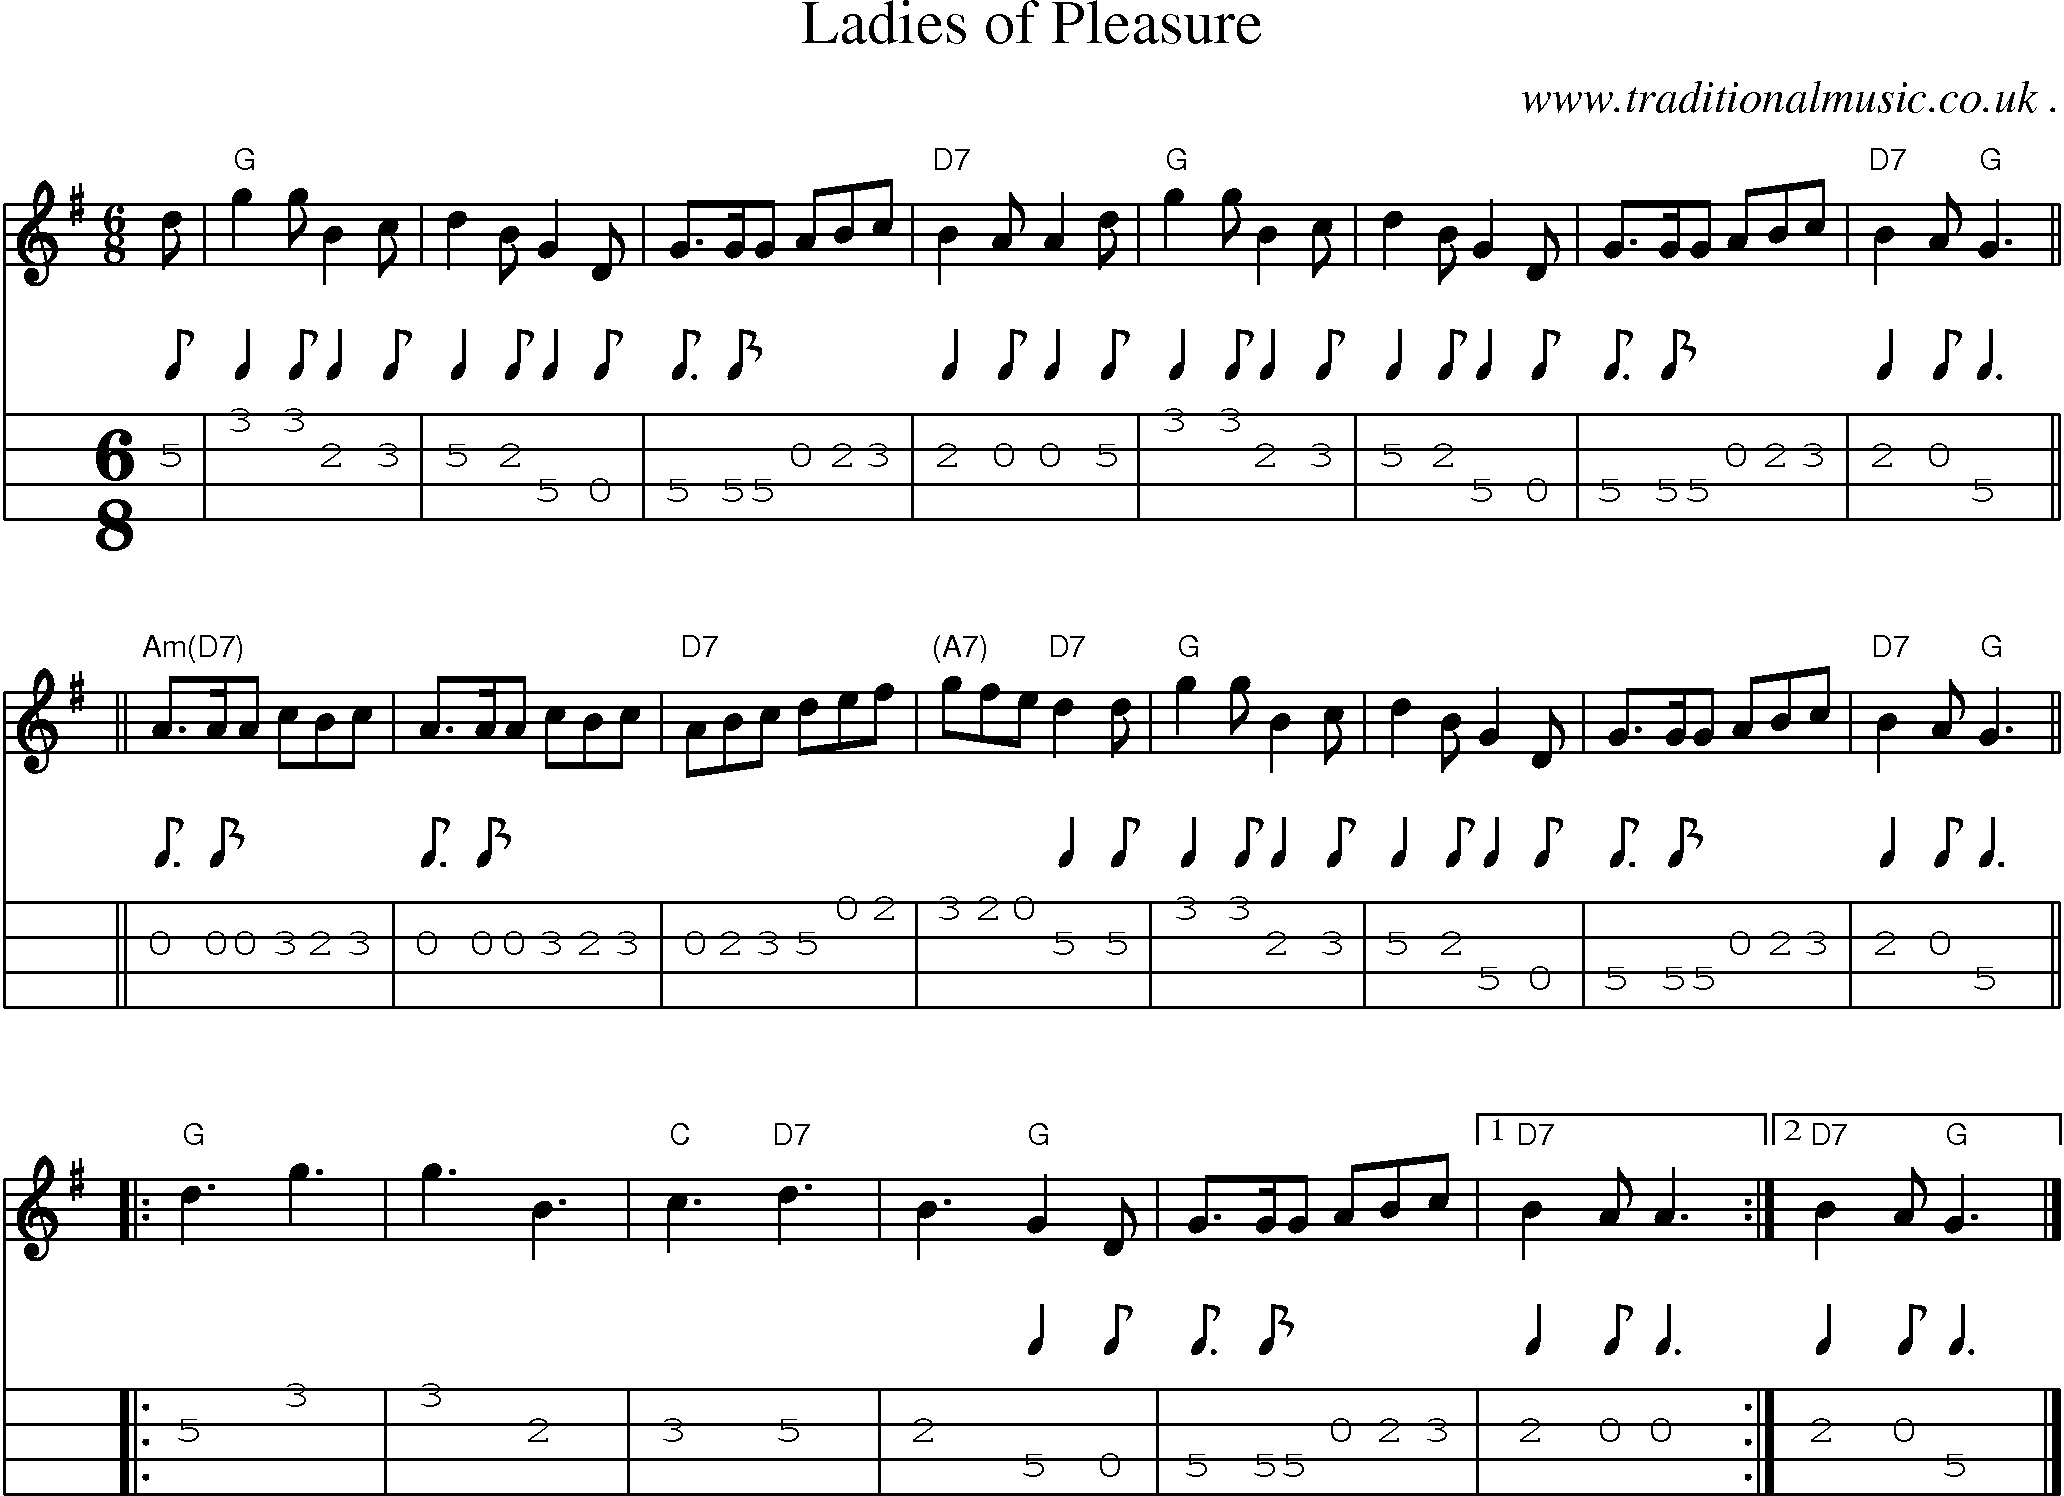 Sheet-music  score, Chords and Mandolin Tabs for Ladies Of Pleasure